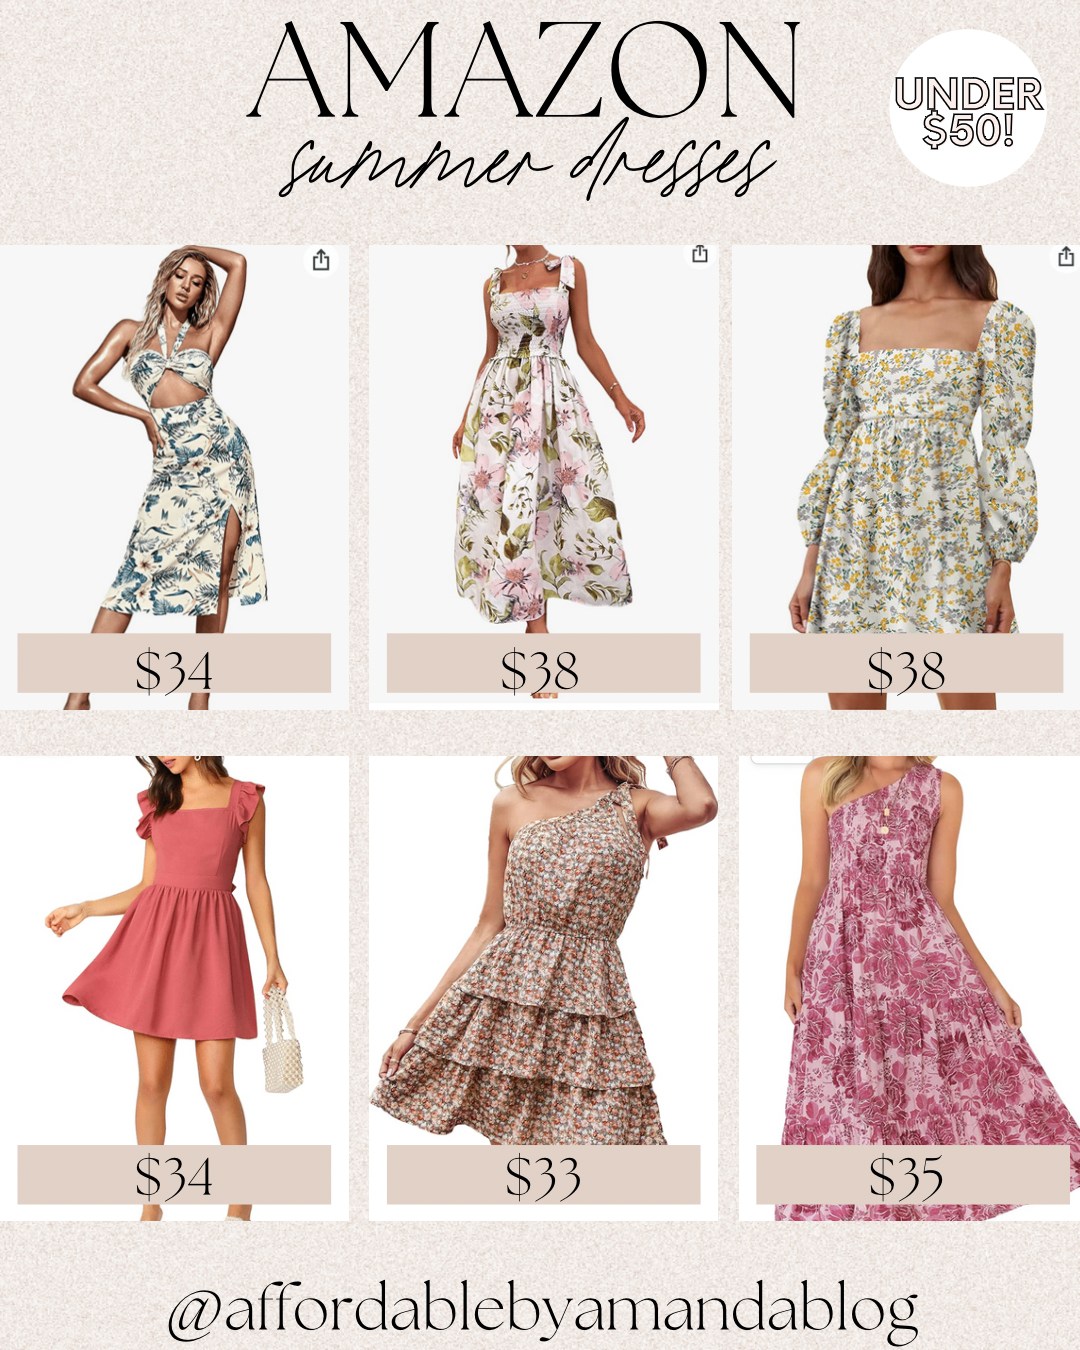 Affordable Amazon Summer Dresses 2022 - Affordable by Amanda